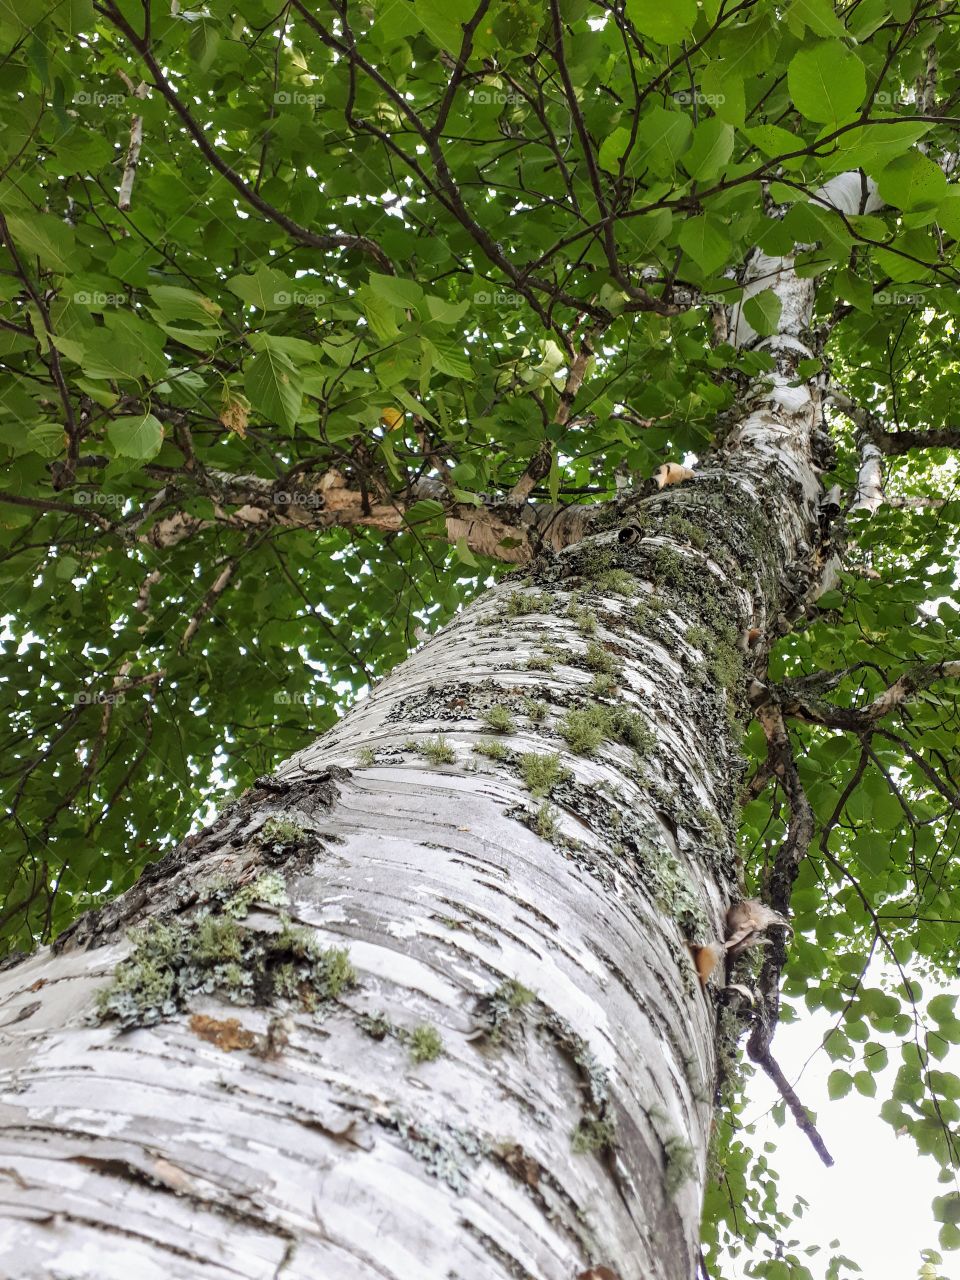 looking up into a green summer birch